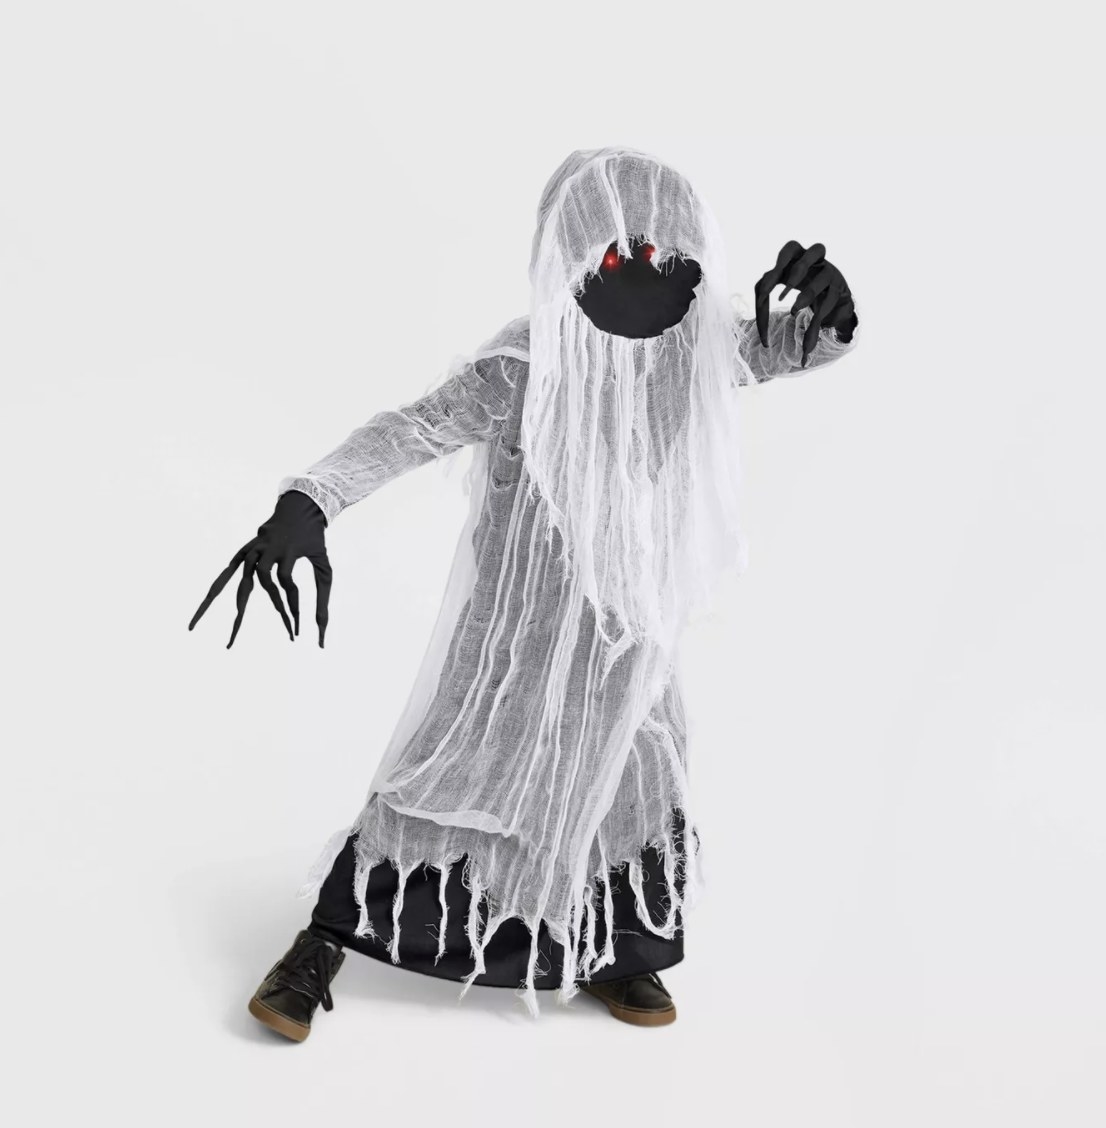 A child is wearing a black robe with ripped white gauze, long black fingers and nails and red light-up eyes against a faceless covering